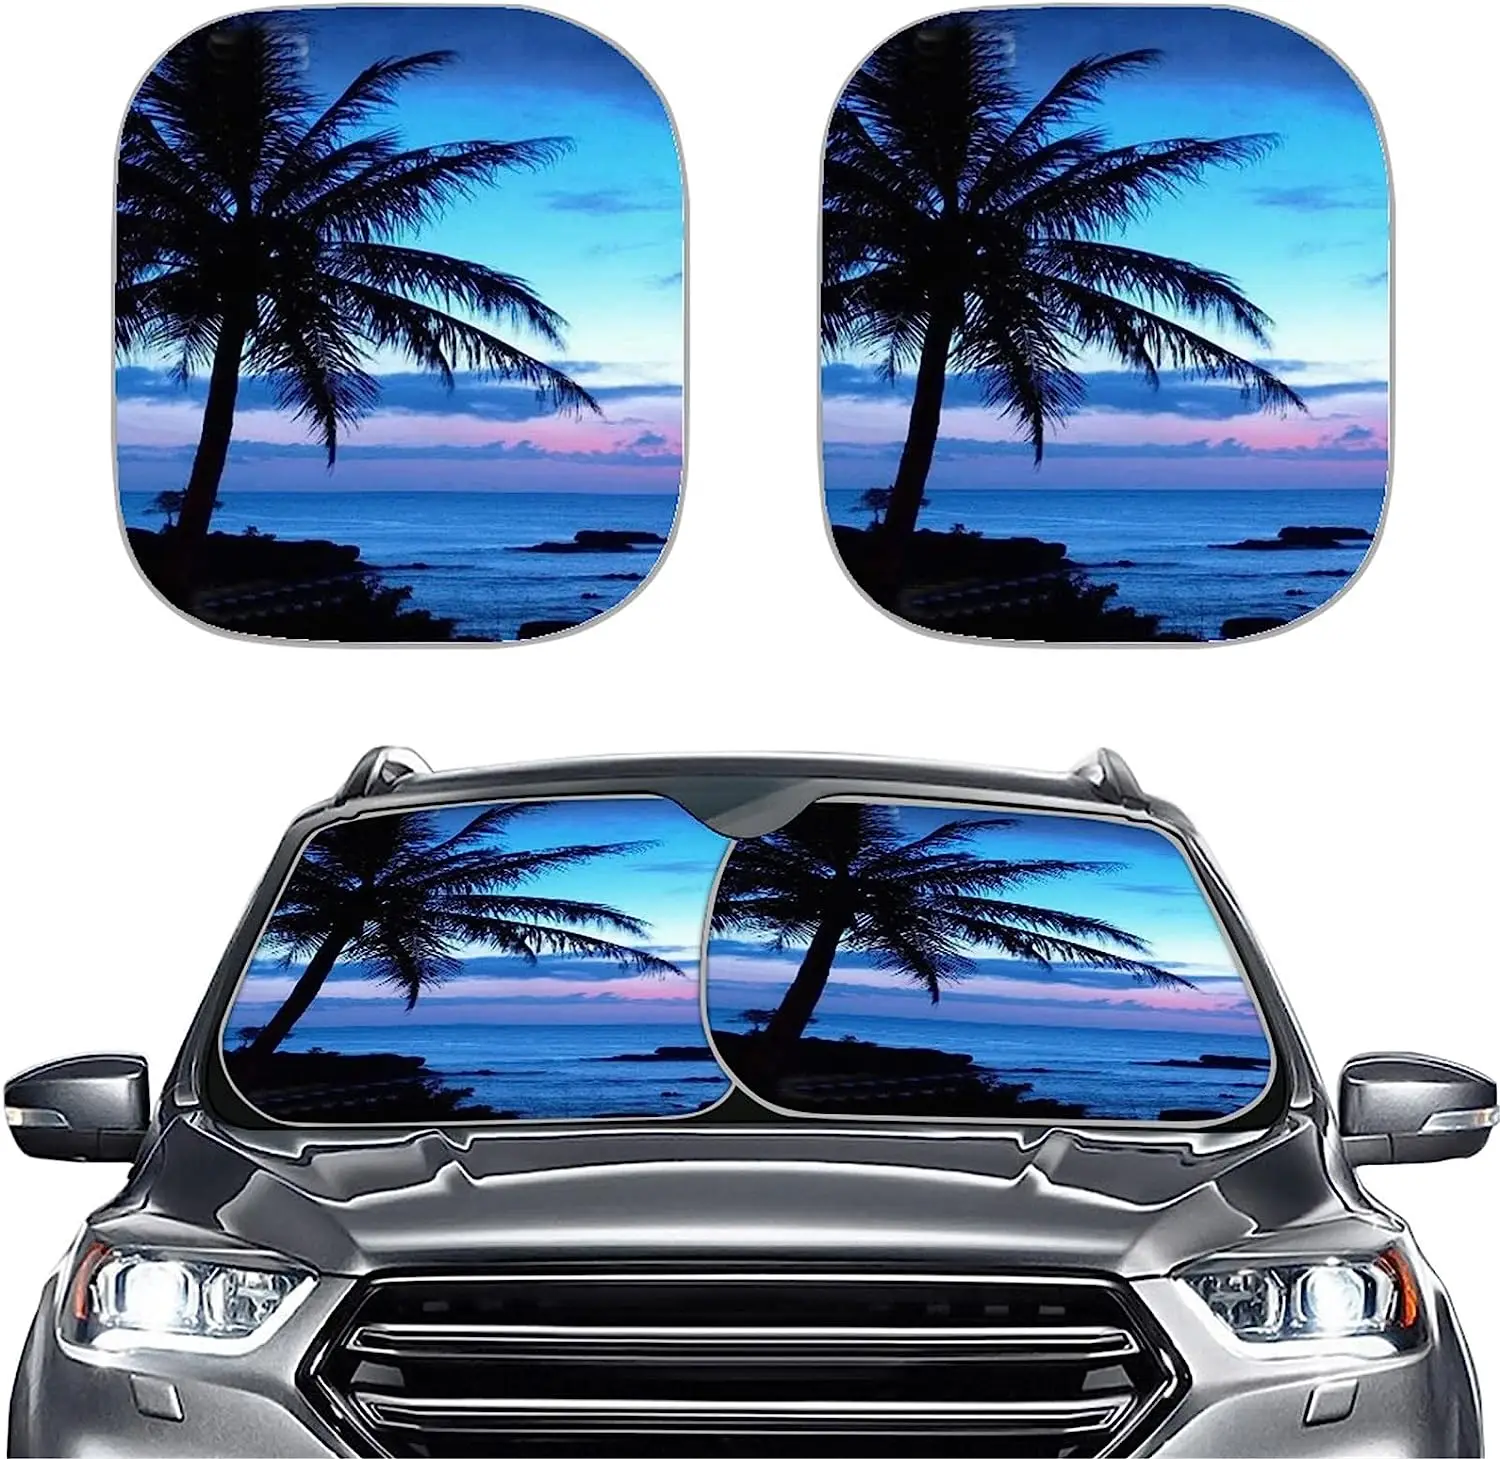 

Tropical Paradise Ocean Beach Scene with Palm Trees Print Front Window Folding Car Windshield Sunshade 2PC Car Accessories